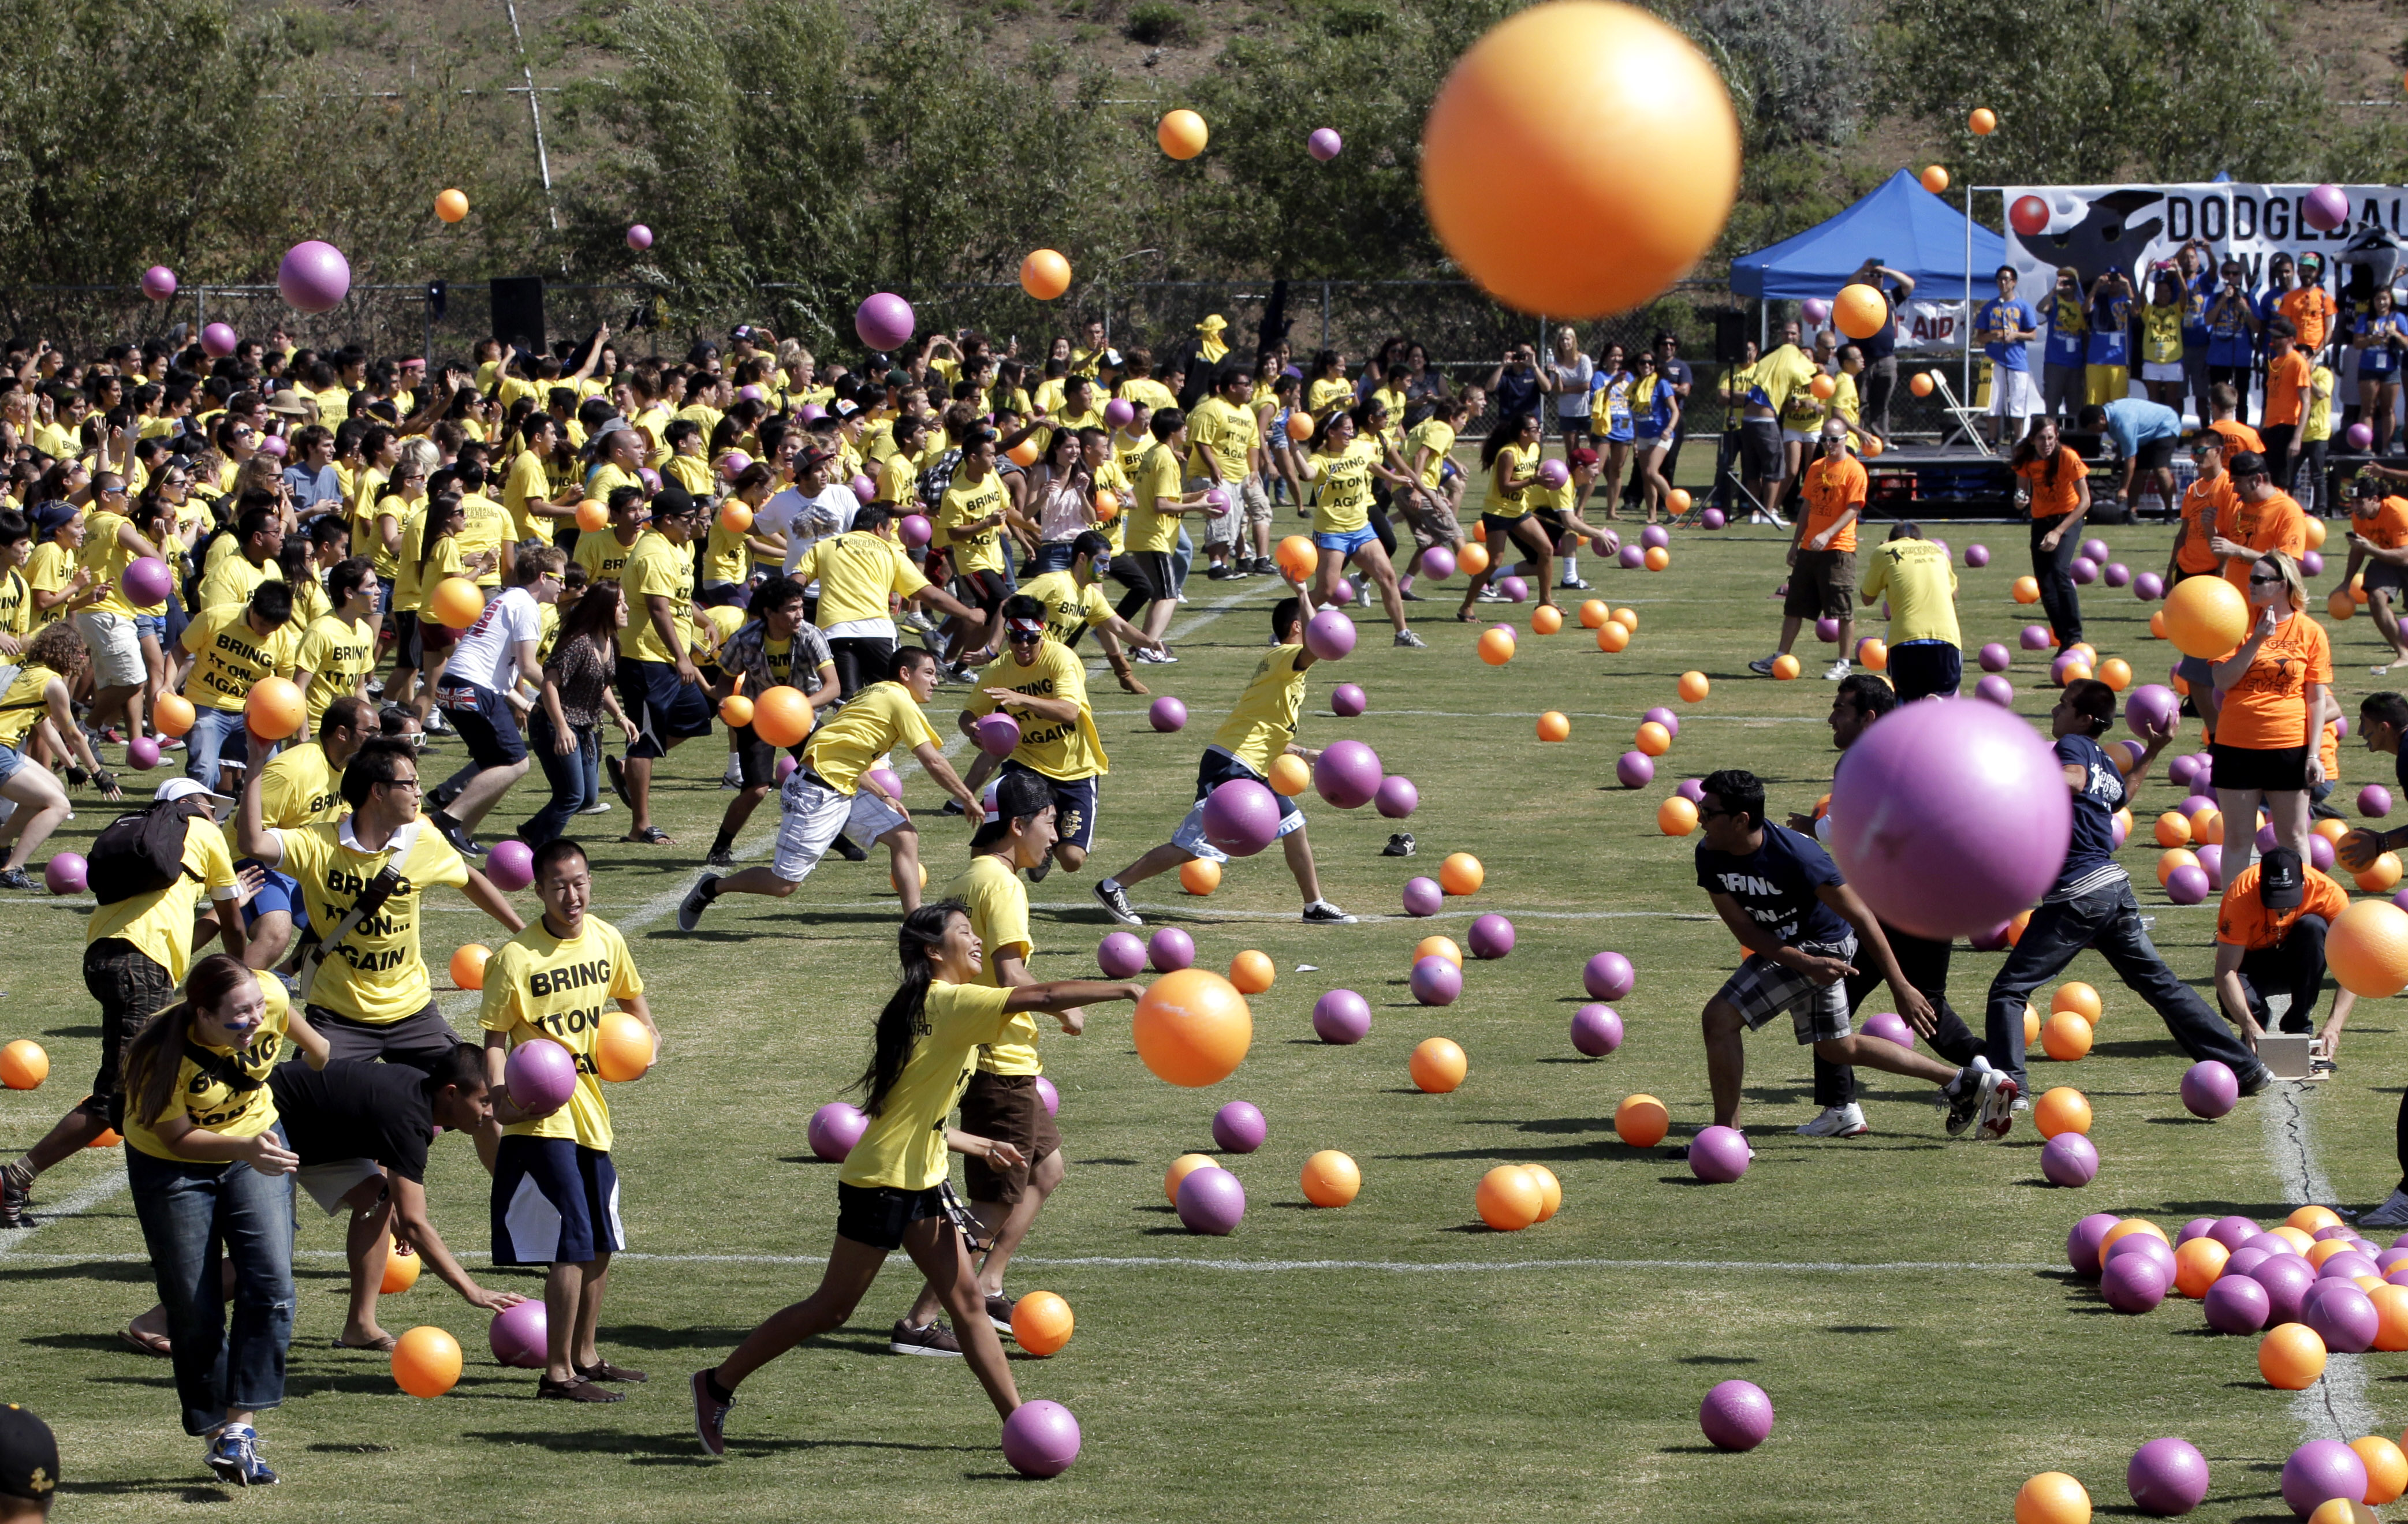 UC Irvine students play dodgeball in an attempt to set the Guinness world record for the largest dodgeball game in Irvine, Calif., Wednesday, Sept. 21, 2011. (AP File Photo/Jae C. Hong)